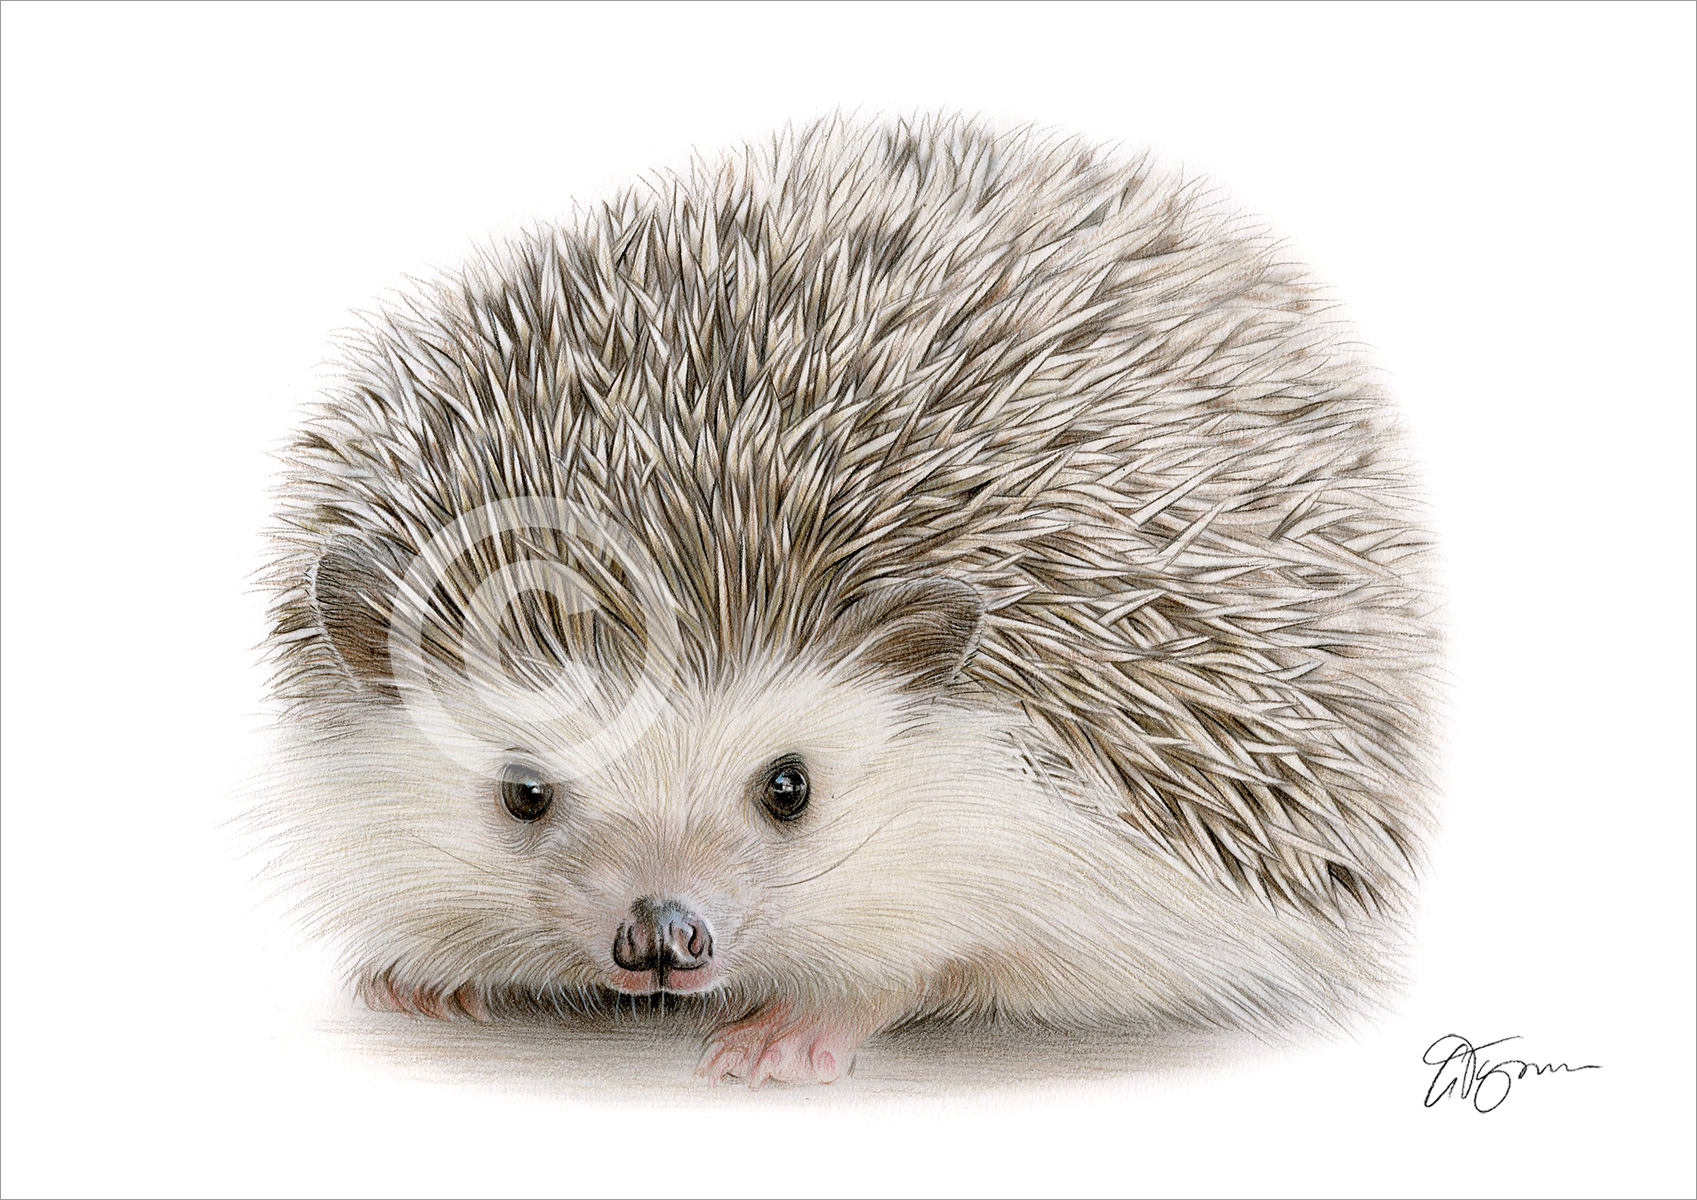 Colour pencil drawing of a hedgehog by artist Gary Tymon